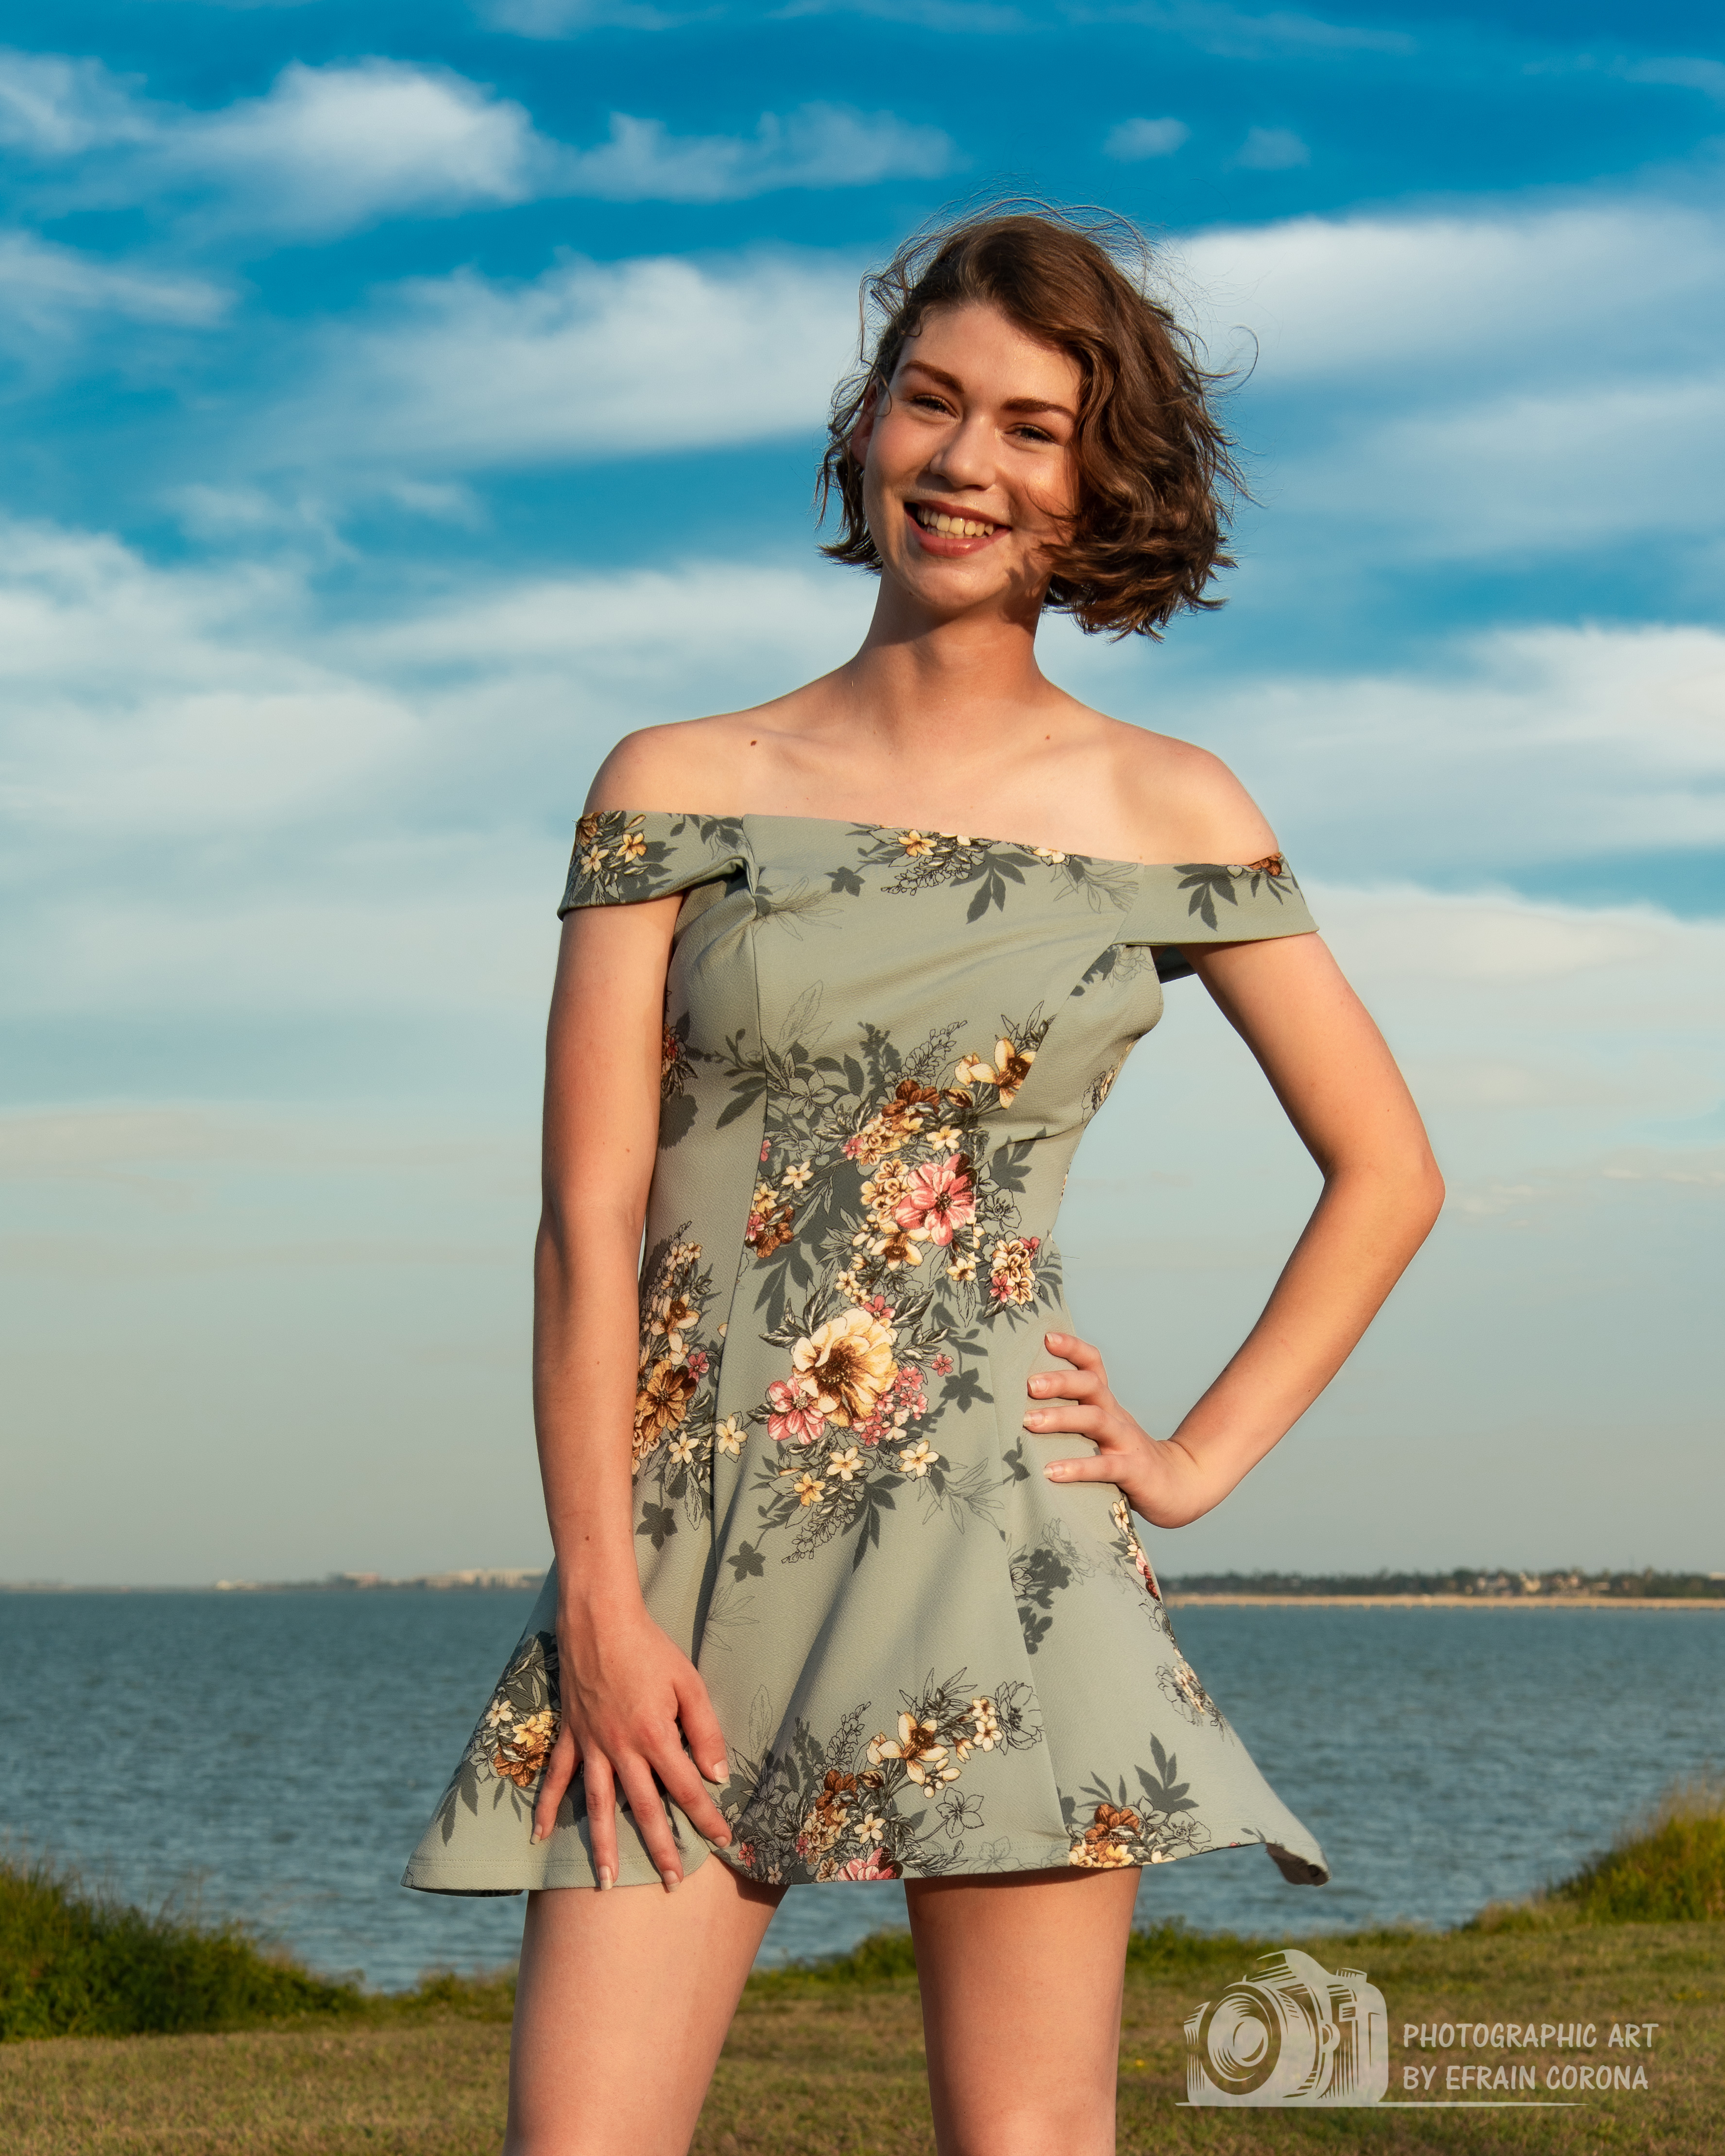 Hailey posing by the ocean in an off-the-shoulder, blue floral dress.